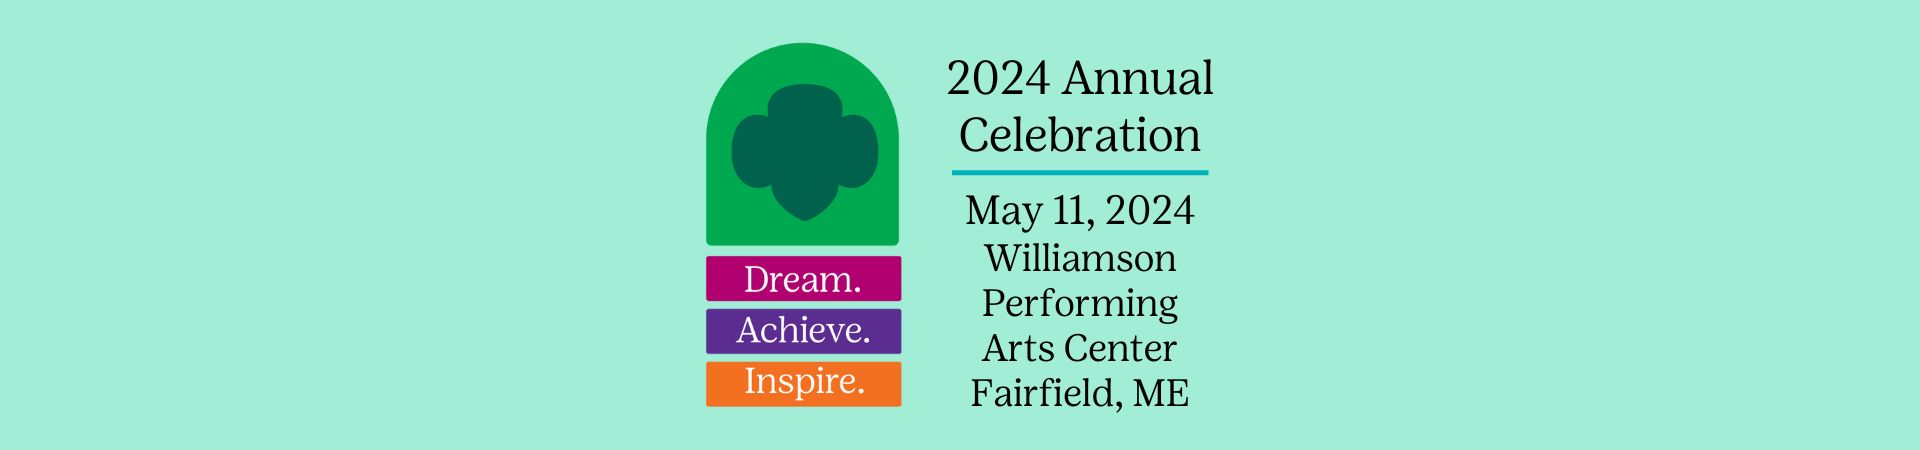  Girl Scouts of Maine Annual Celebration 